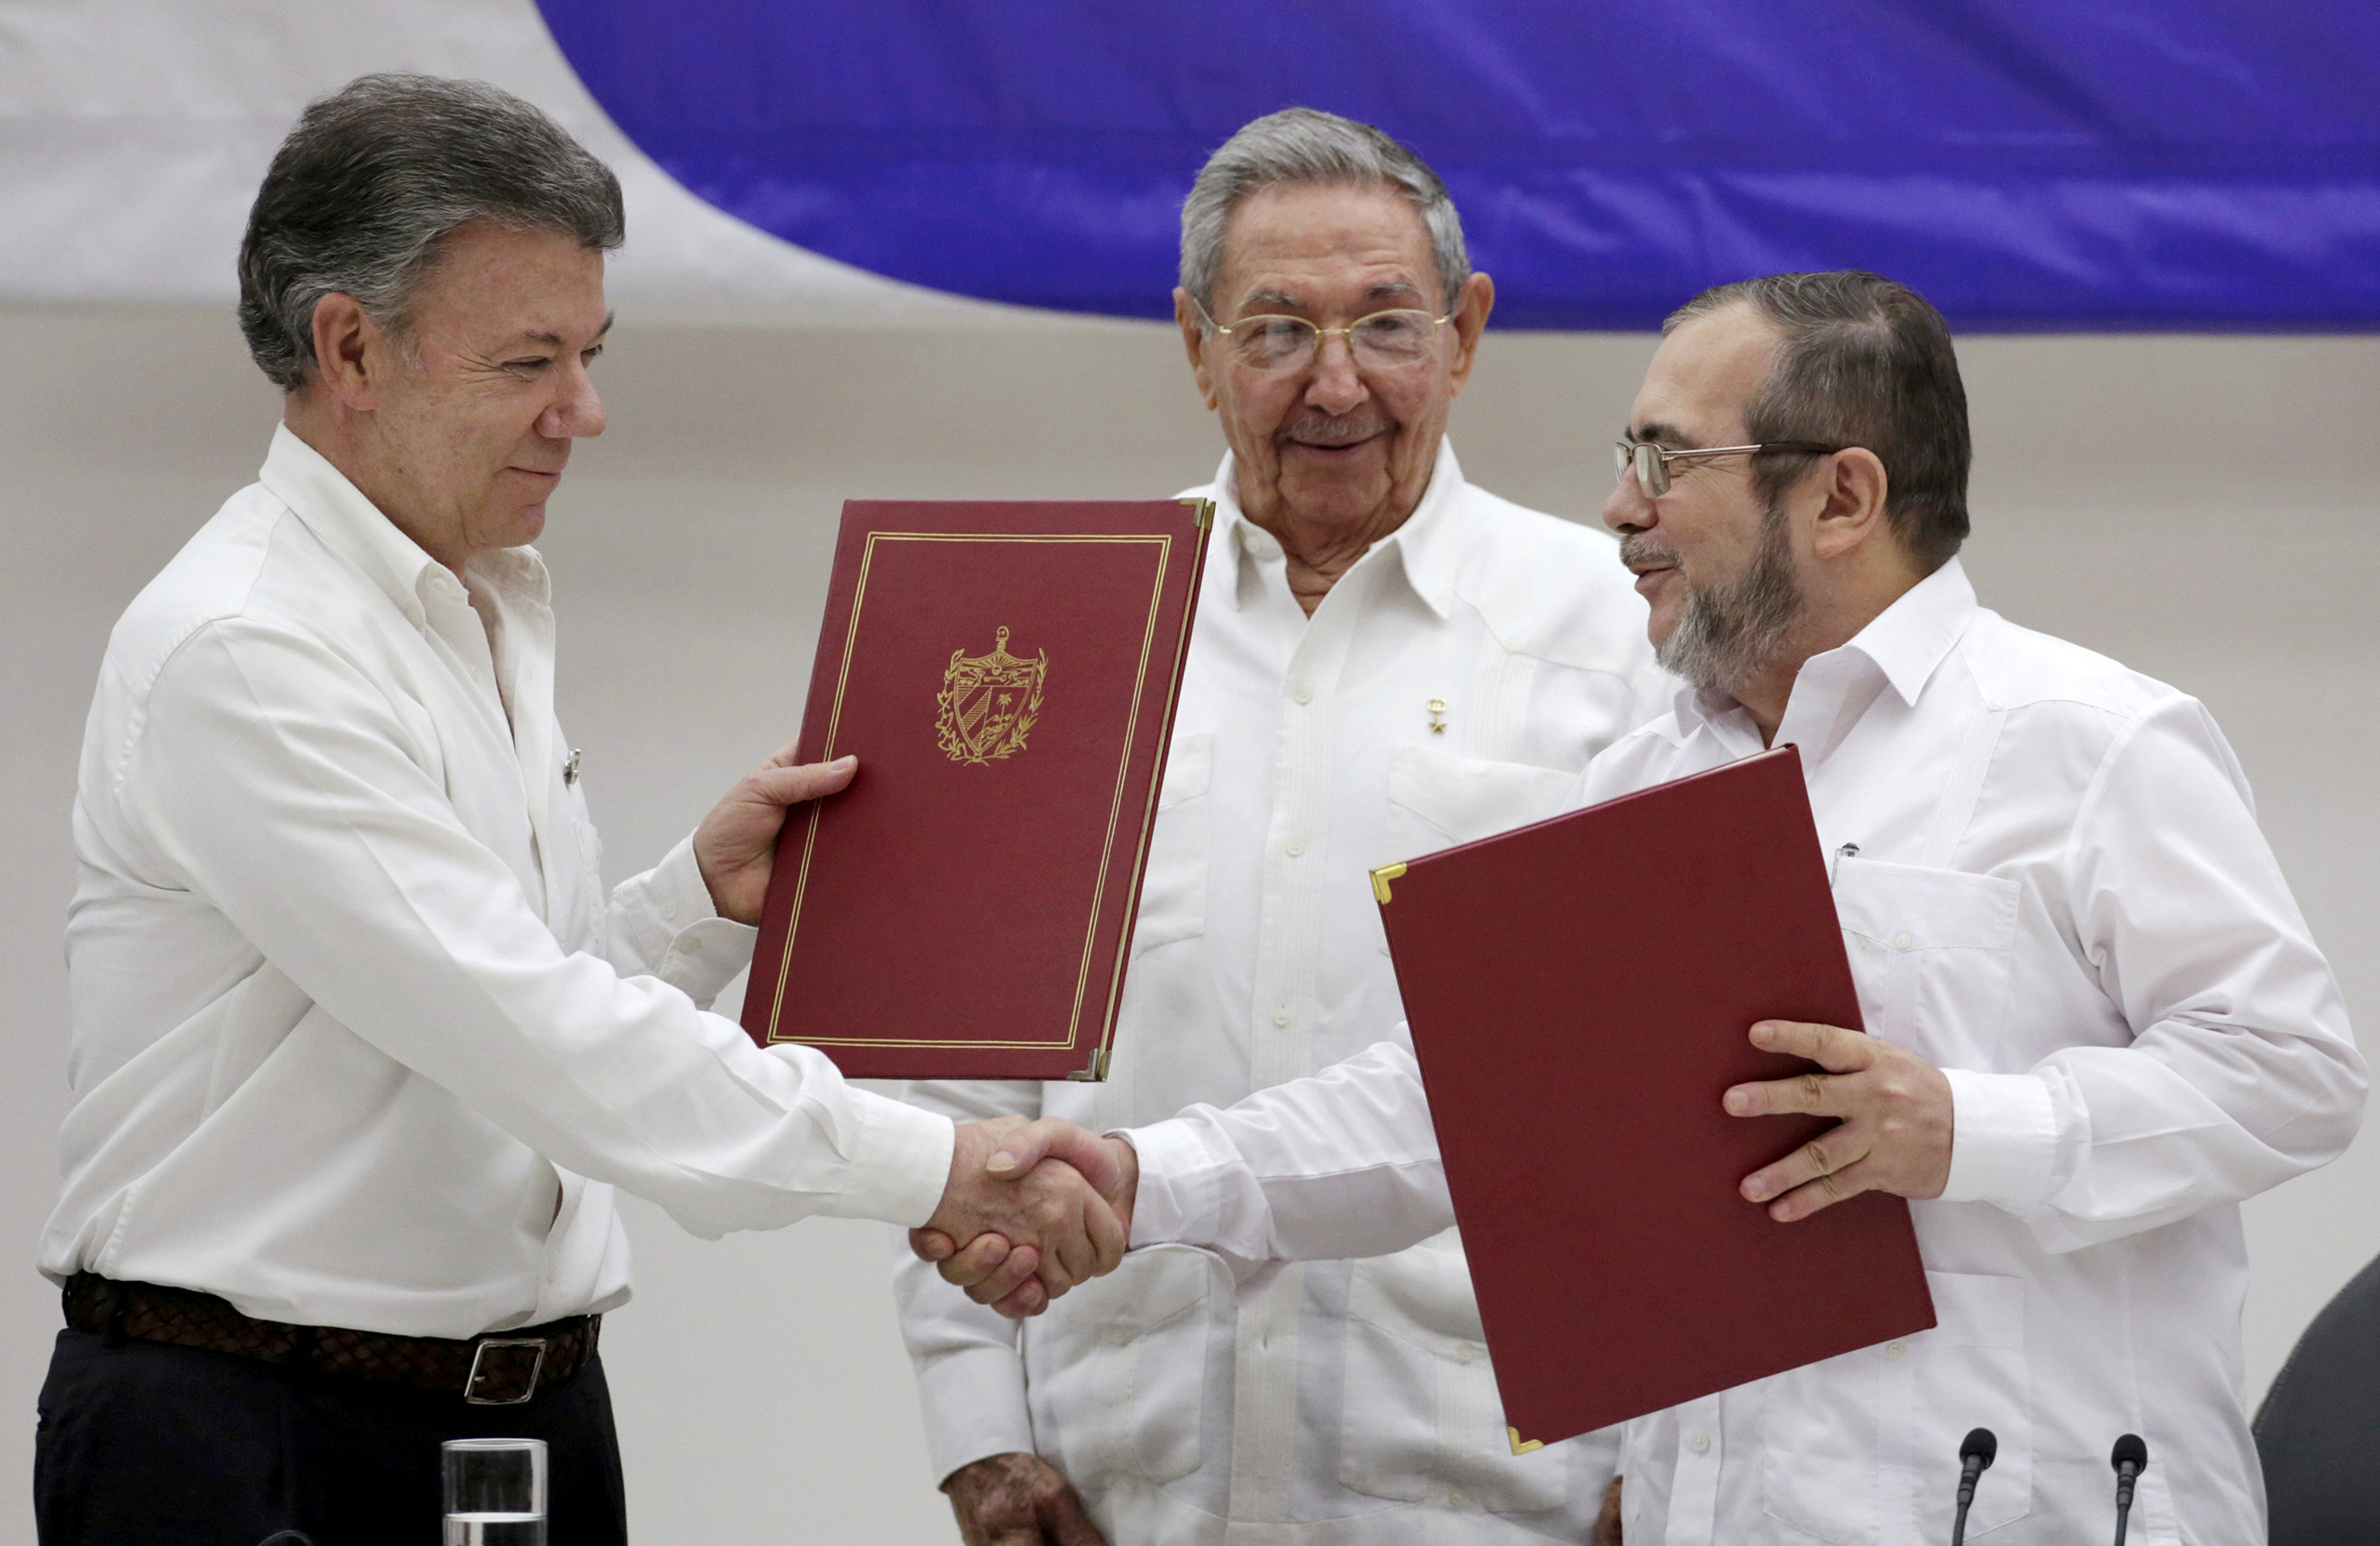 Colombia's President Juan Manuel Santos, left, shakes hands with FARC rebel leader Rodrigo Londono, better known by his nom de guerre Timochenko, right, as Cuba's President Raul Castro looks on after the signing of a historic ceasefire deal between the Colombian government and FARC rebels in Havana, Cuba, on June 23, 2016. (Enrique de la Osa—Reuters)